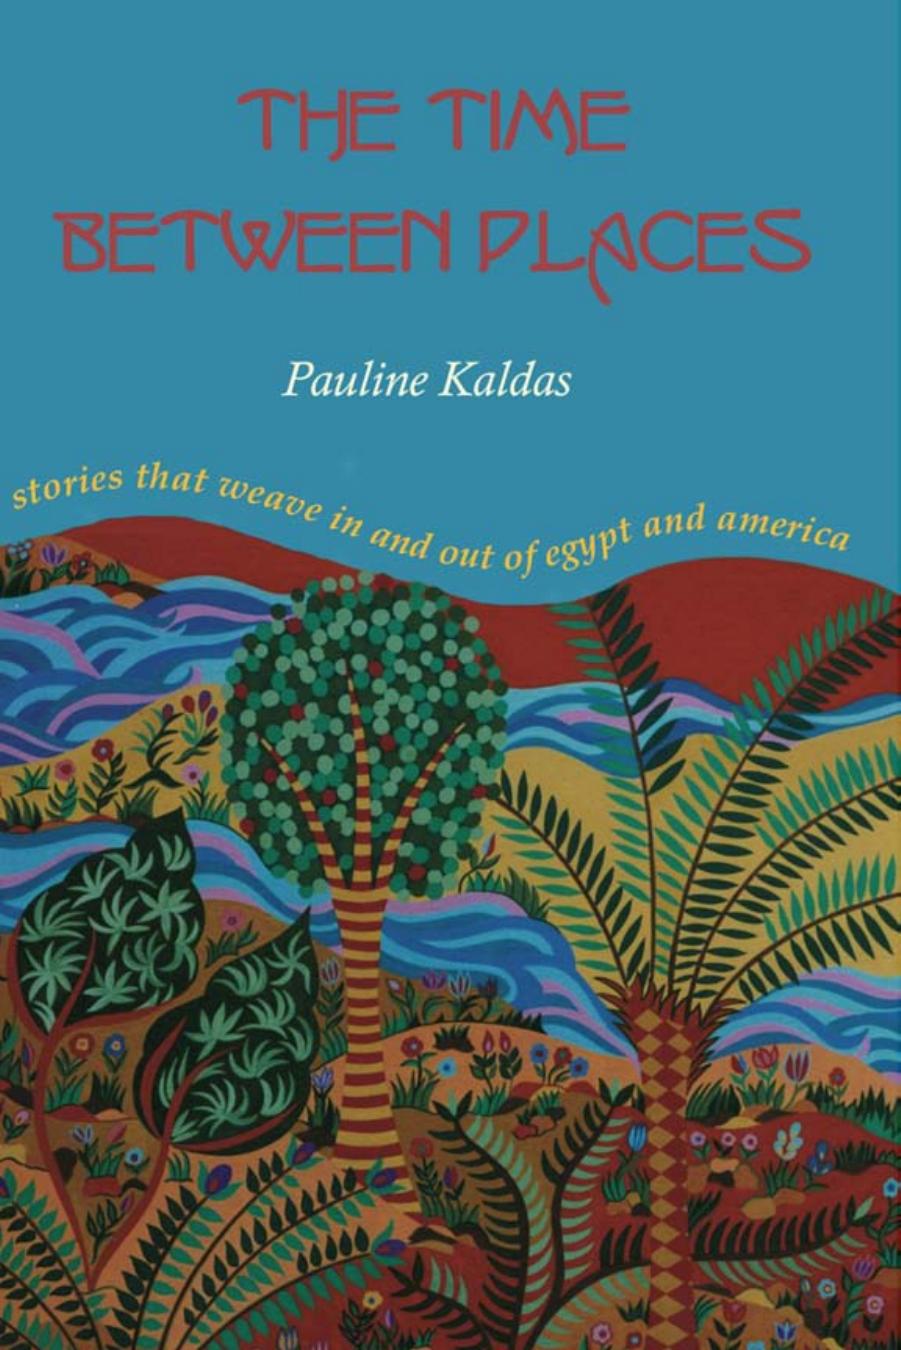 The Time Between Places : Stories That Weave in and Out of Egypt and America by Pauline Kaldas